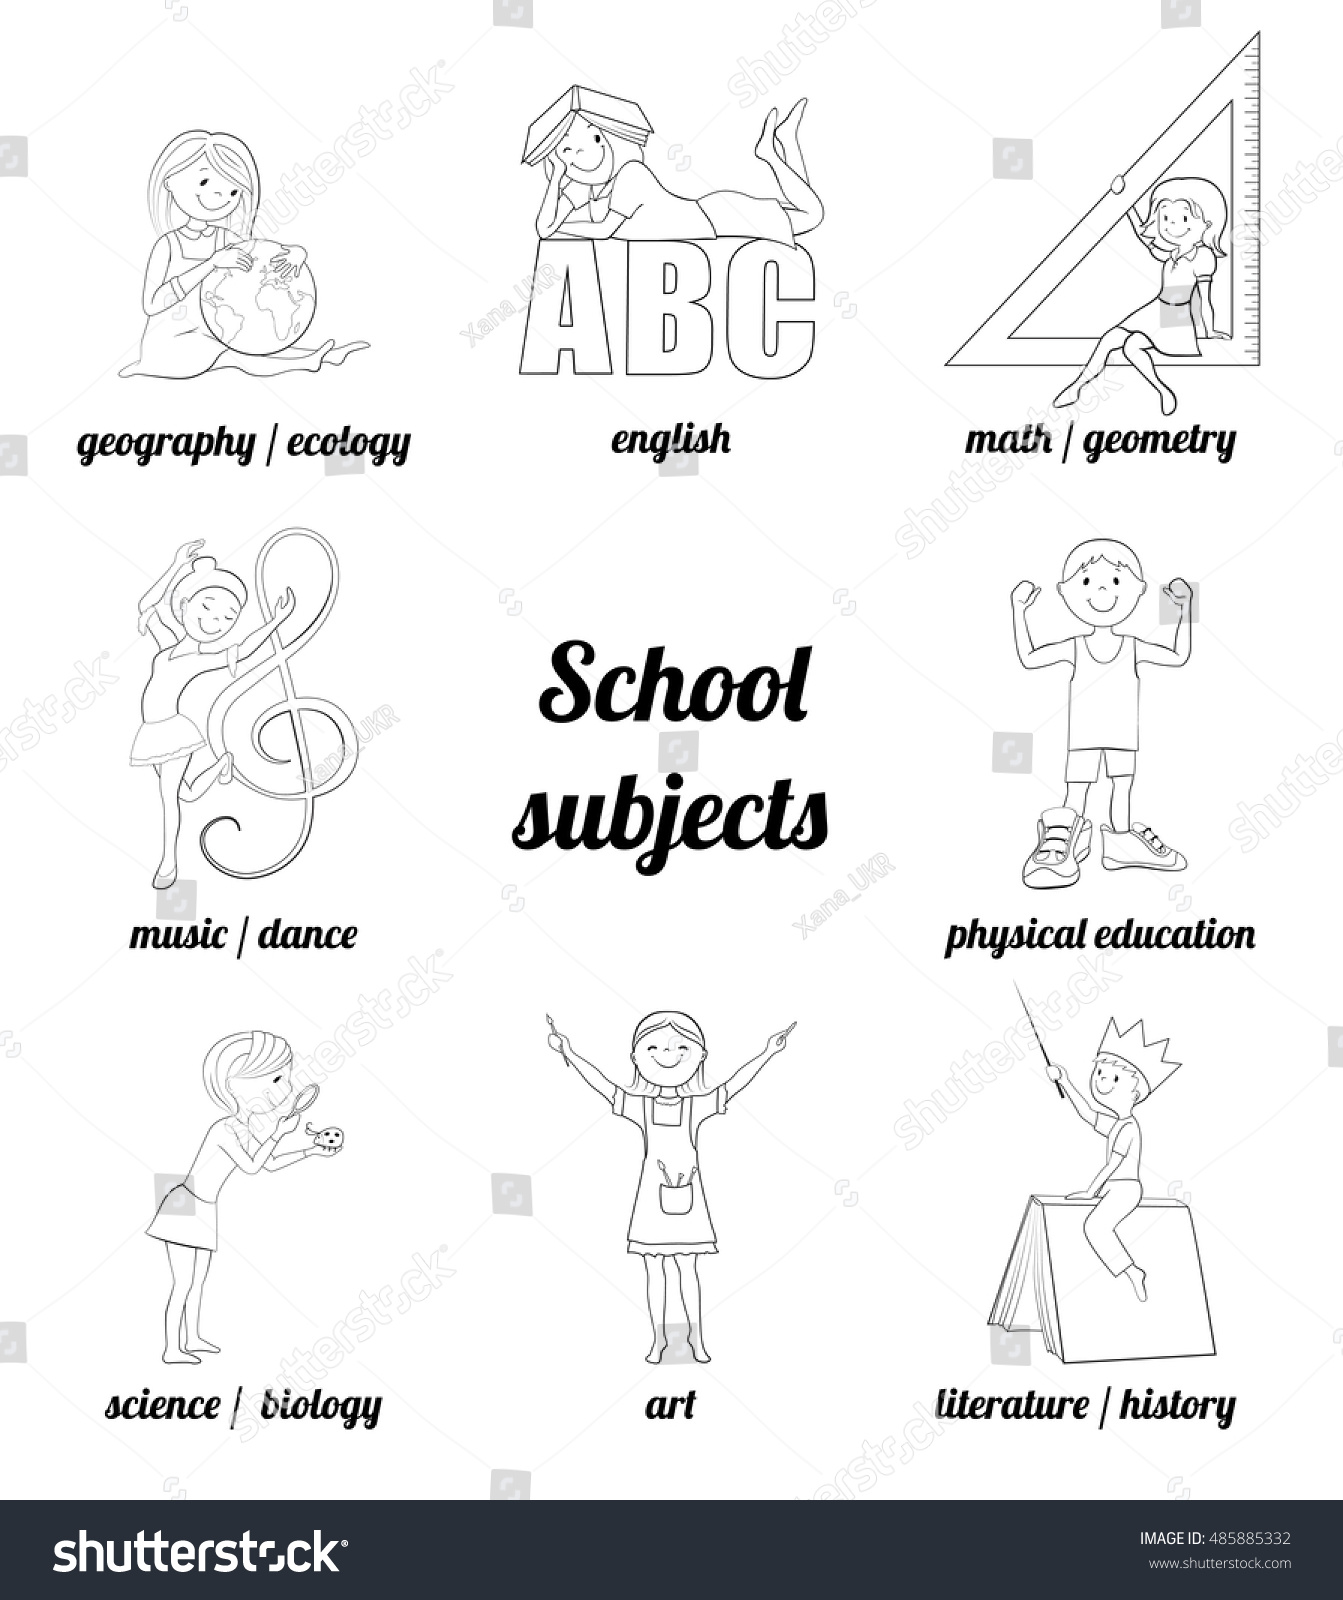 School Subjects Vector Coloring Page Math And English Music And